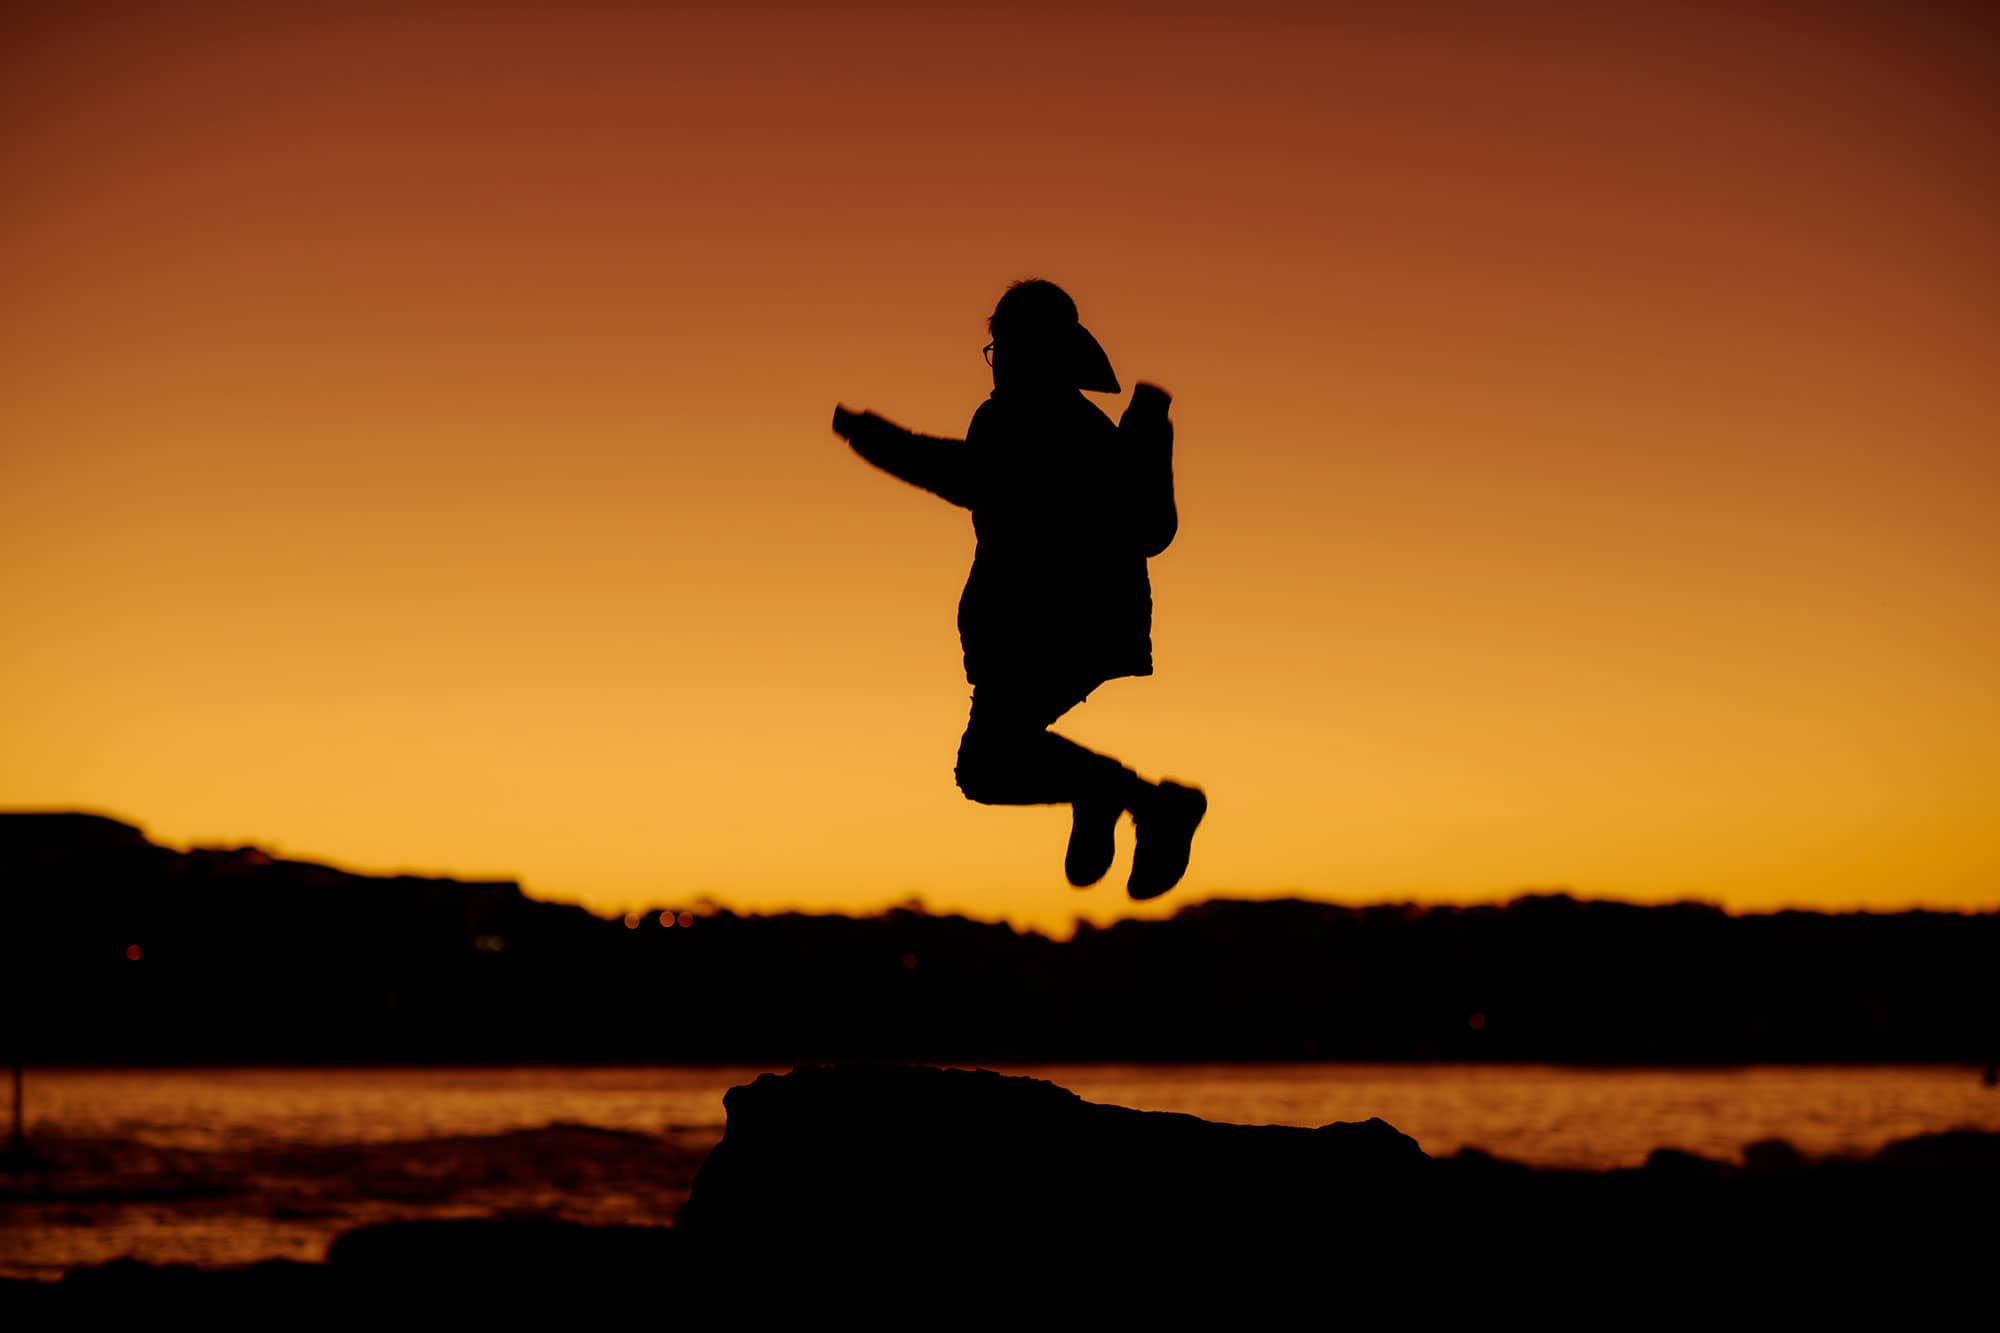 sunset Silhouette Jump by Calvin at Terrigal